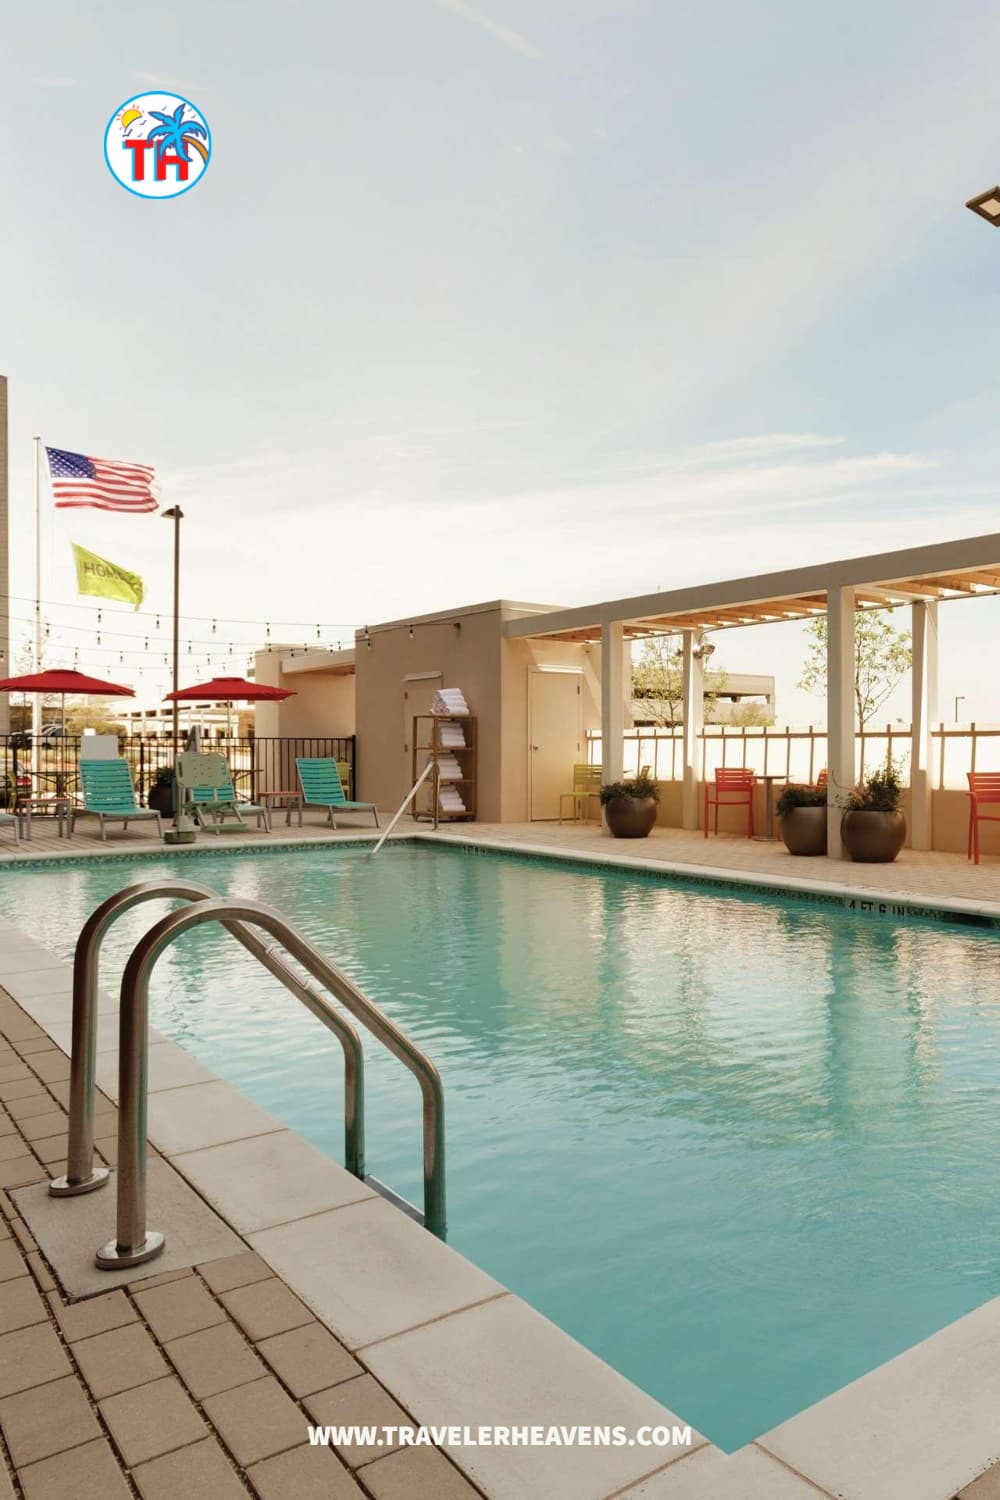 Hotels, Round Rock, round rock hotels with indoor pool, Texas Travel Guide, Travel to Texas, Visit Round Rock